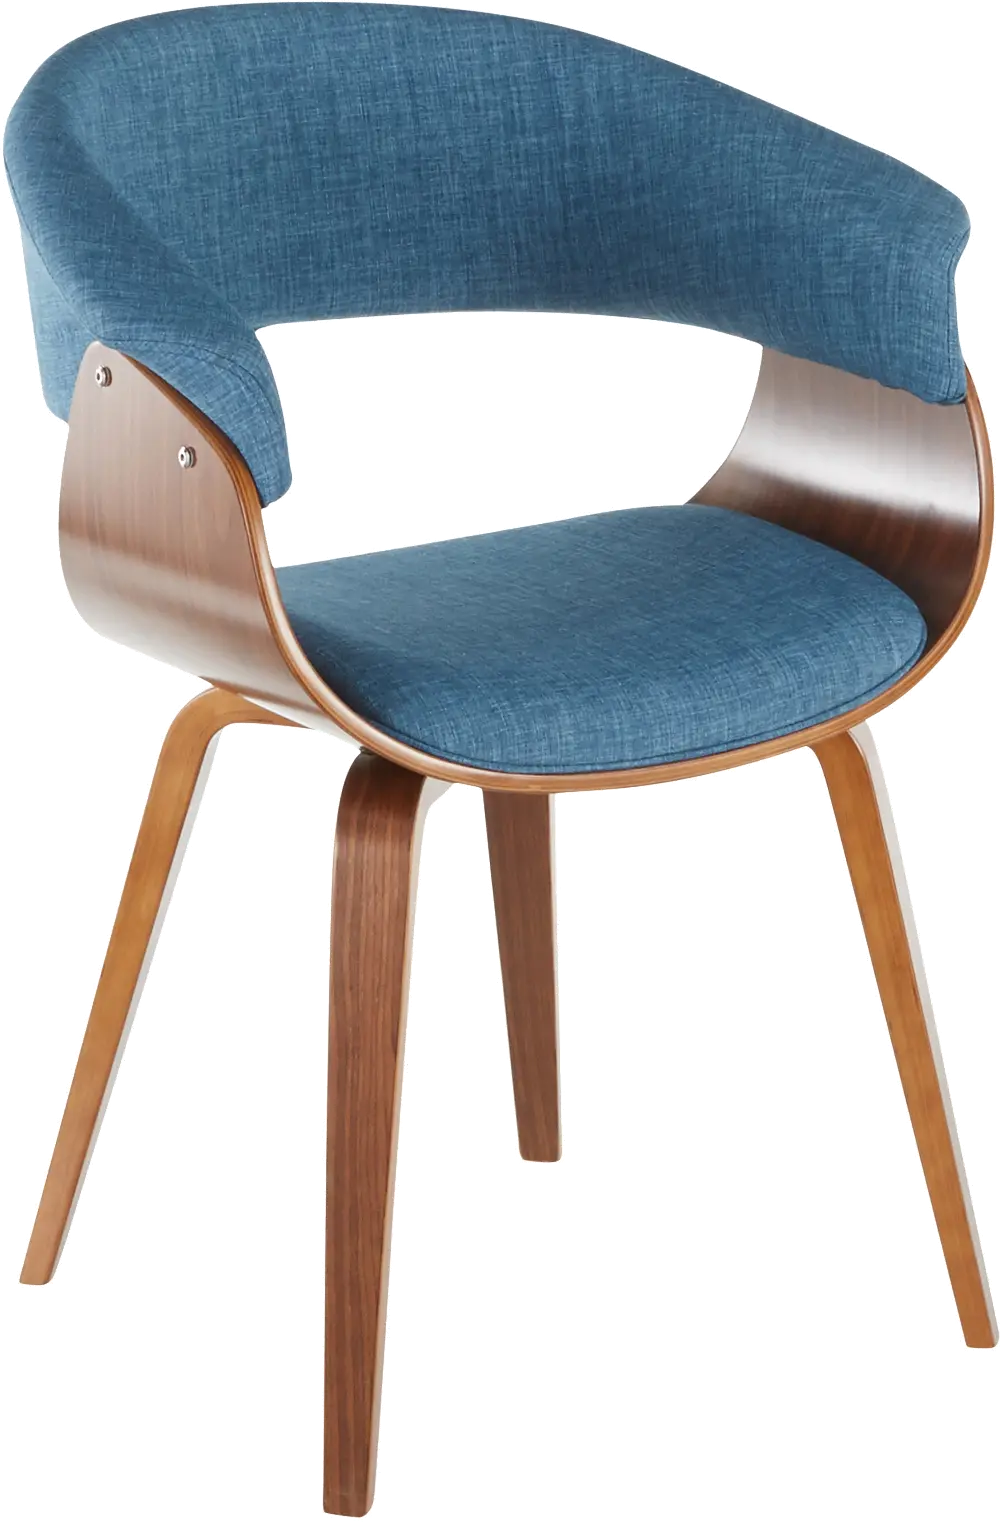 CH-VMONL WLBU Mid Century Brown and Blue Dining Room Chair - Vintage Mod-1